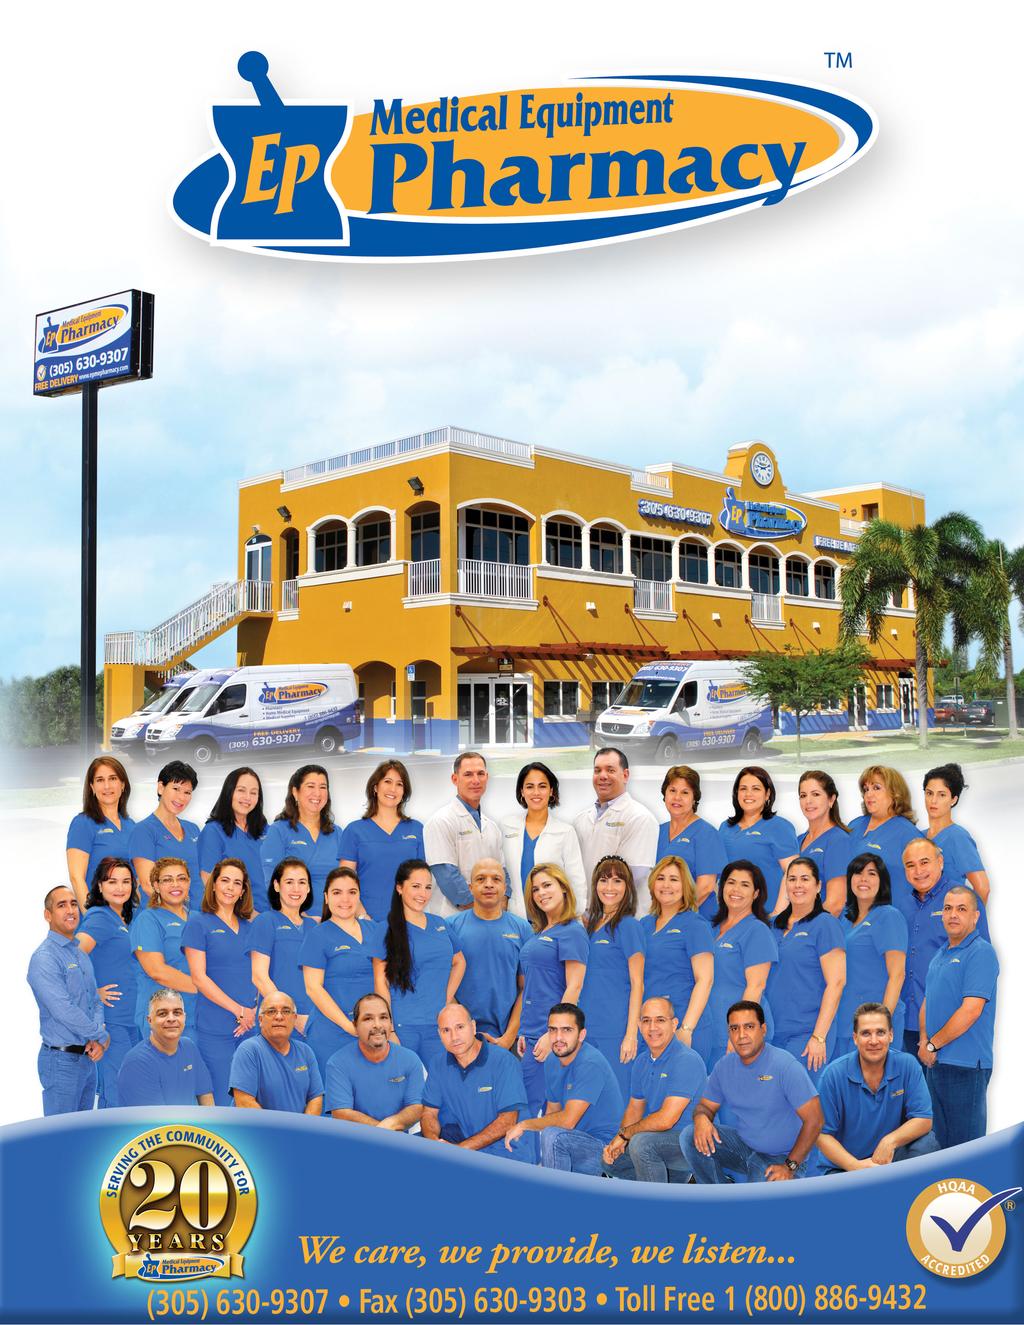 For 20 years, EP Medical Equipment Pharmacy has been committed to offering quality products for all of your home healthcare needs.